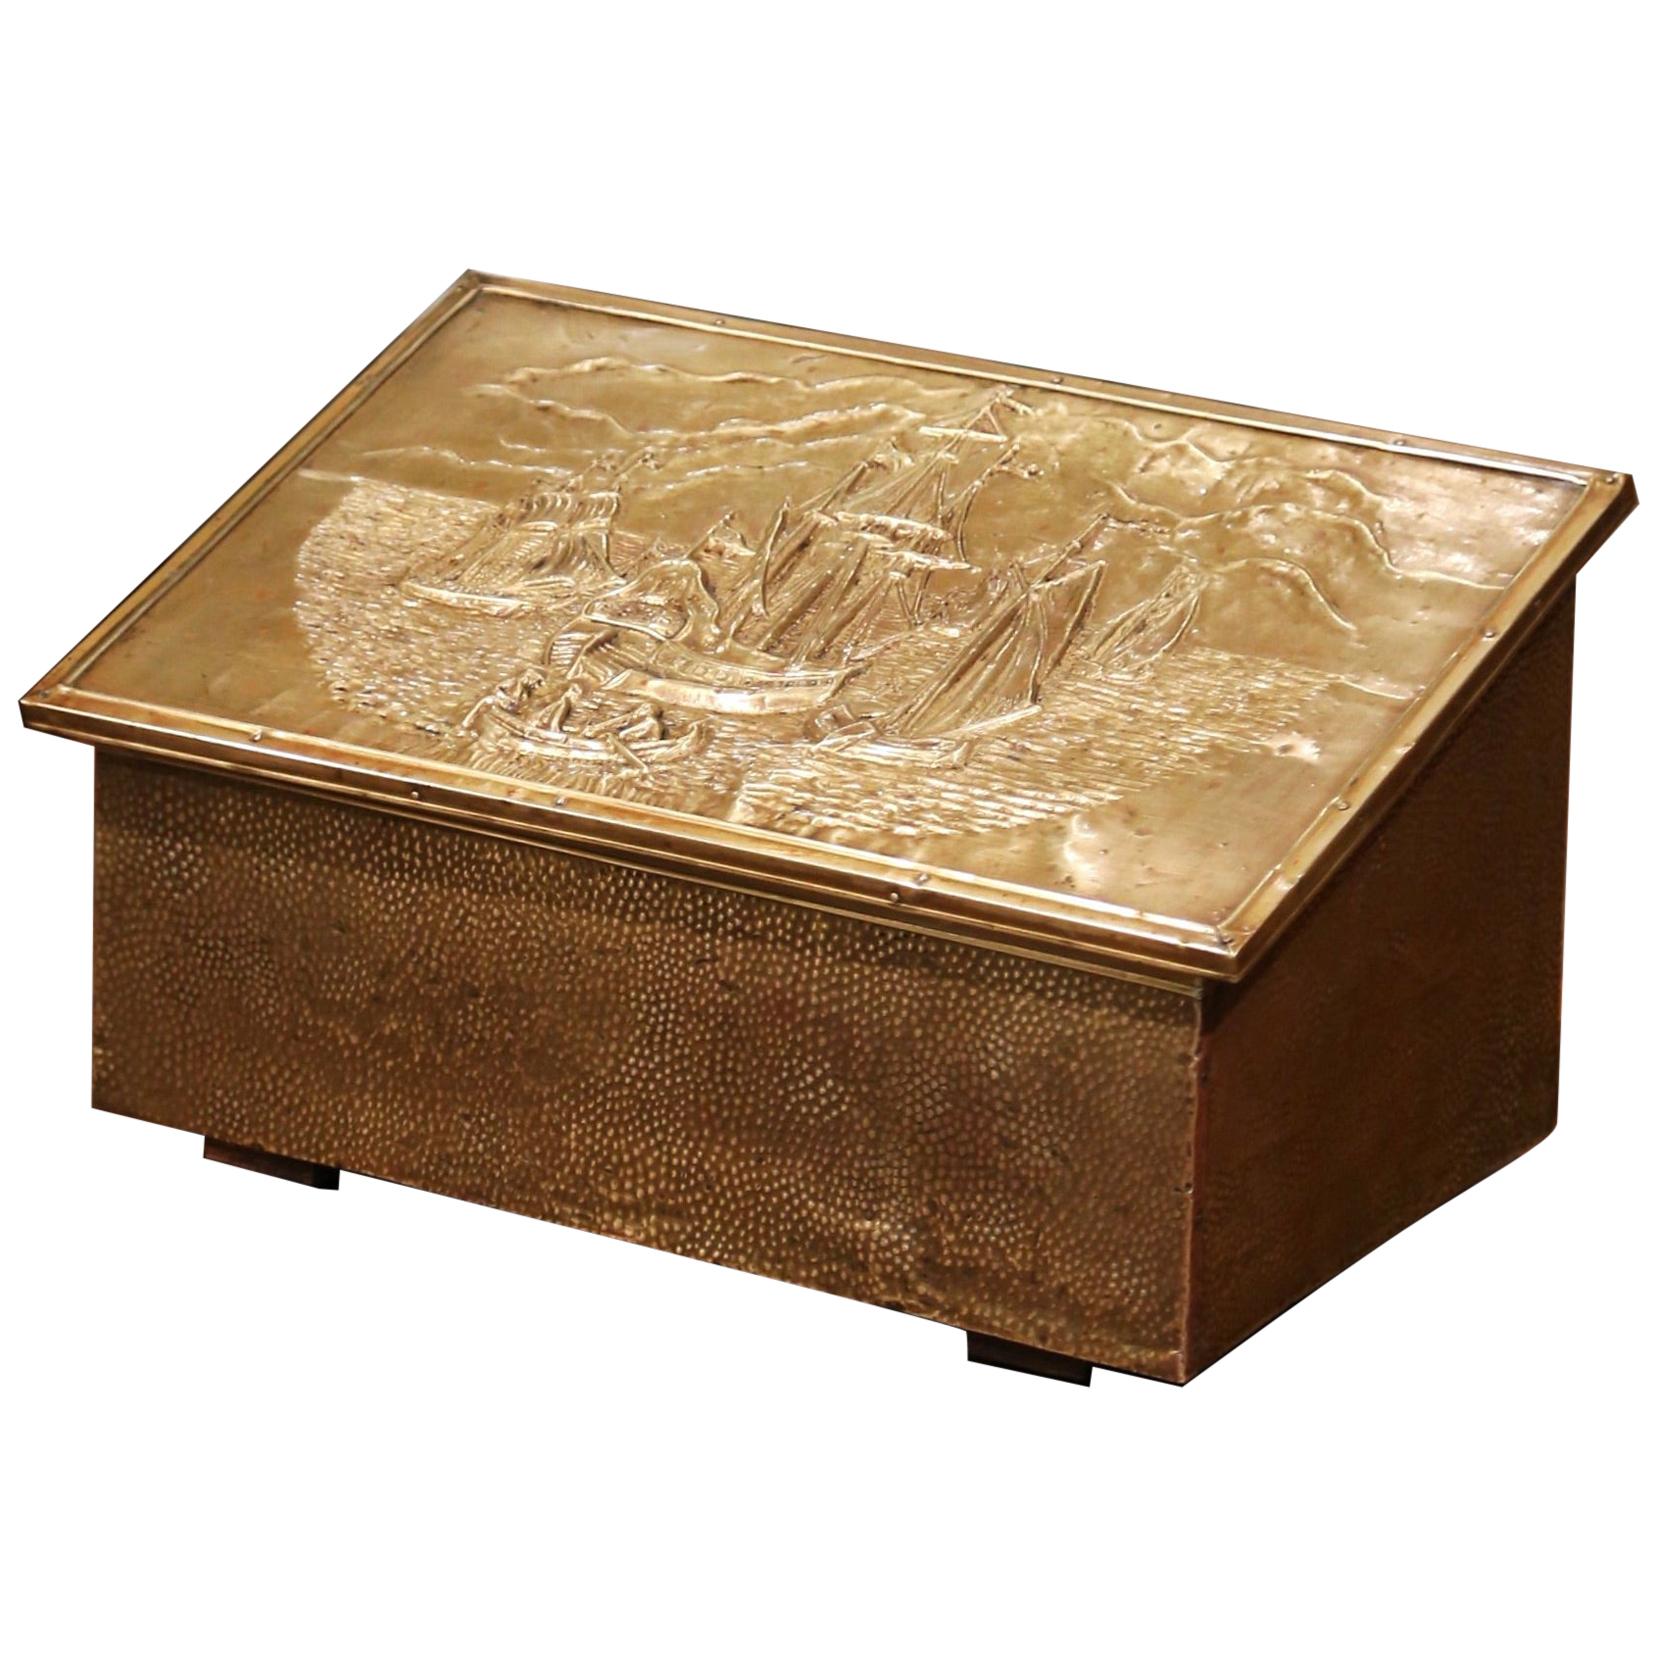 Early 20th Century French Repousse Brass and Wooden Box with Sailboats Decor